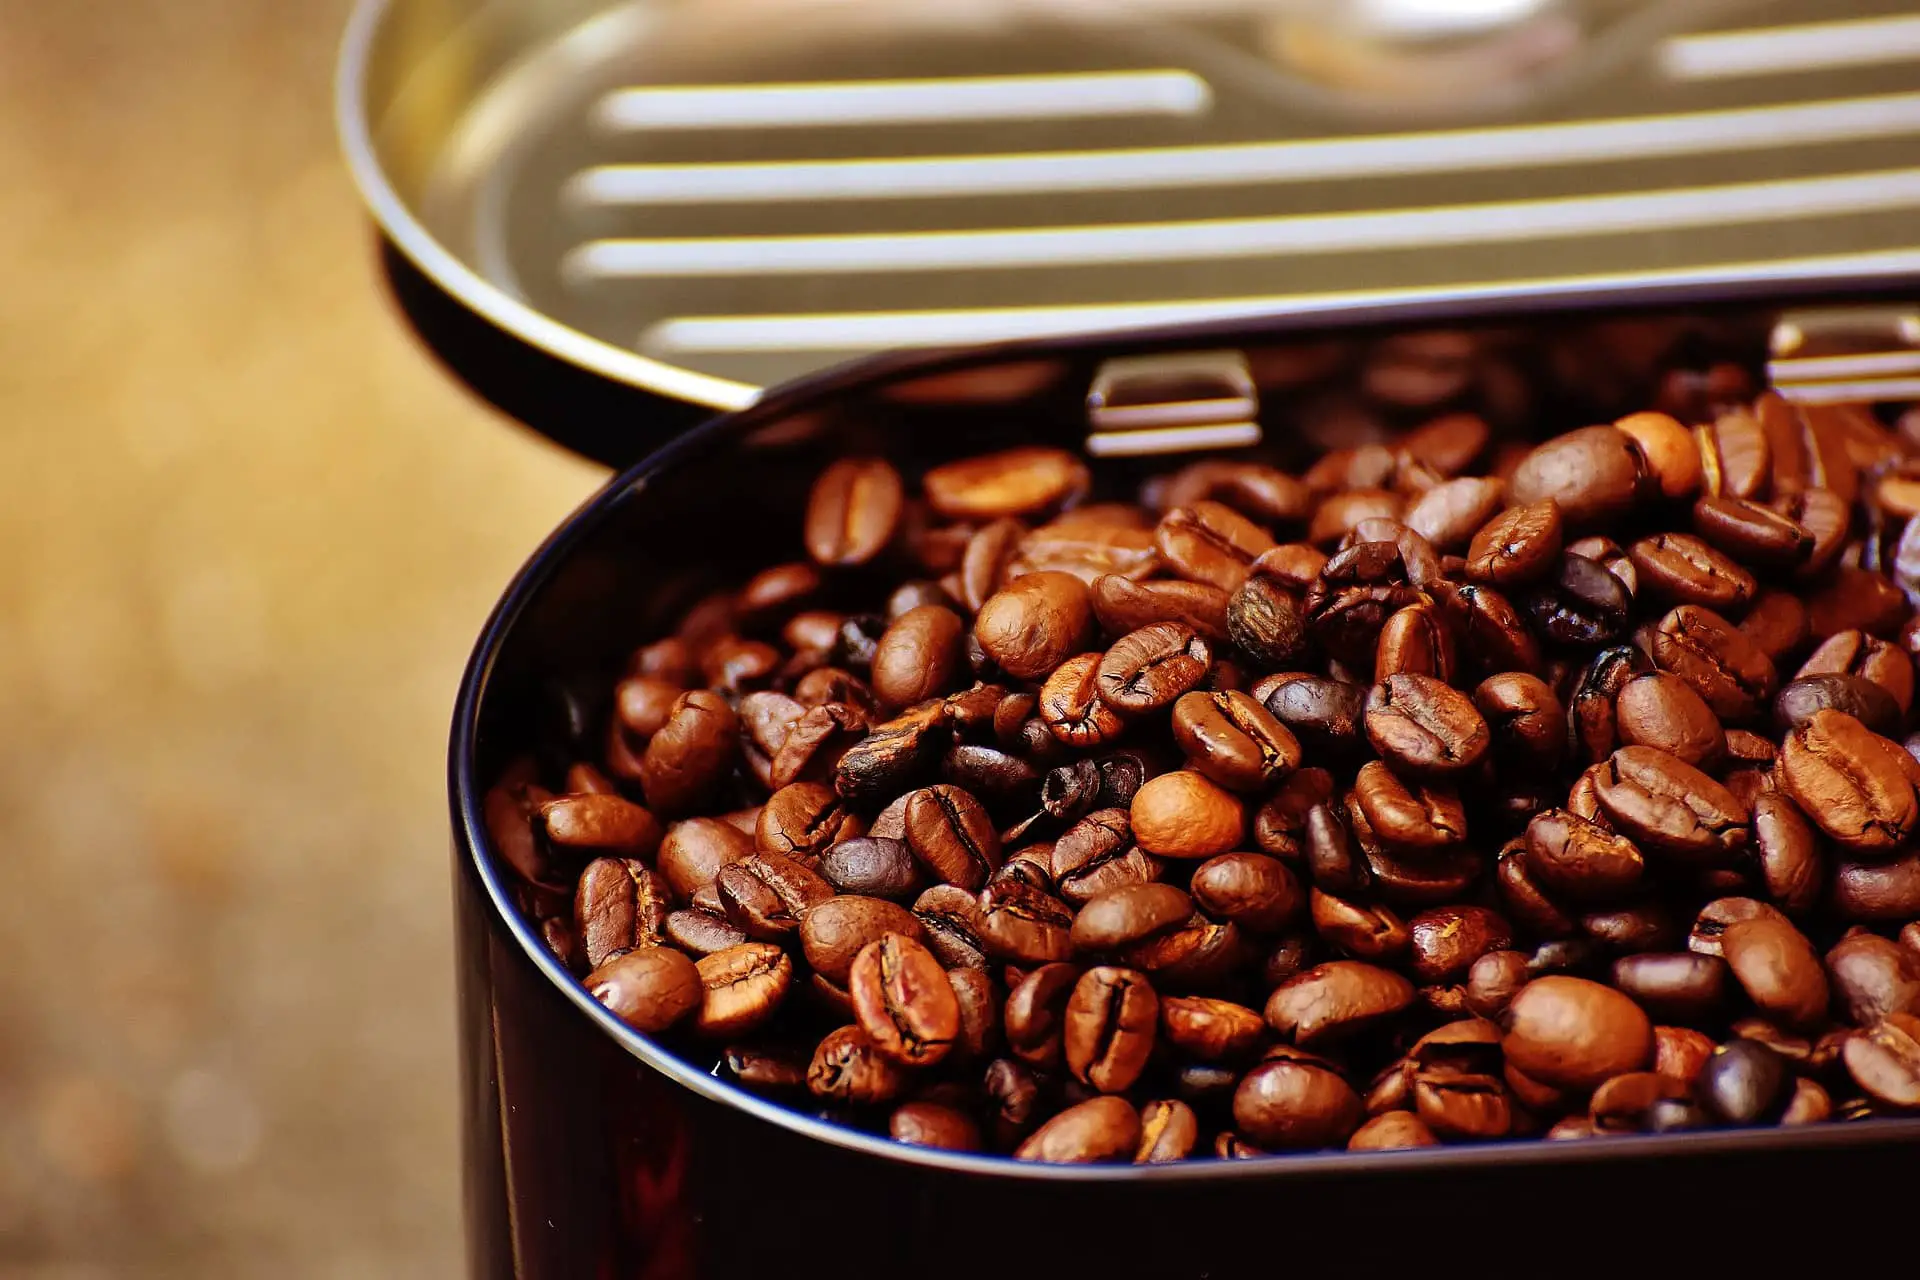 What to do with coffee beans you don't like?